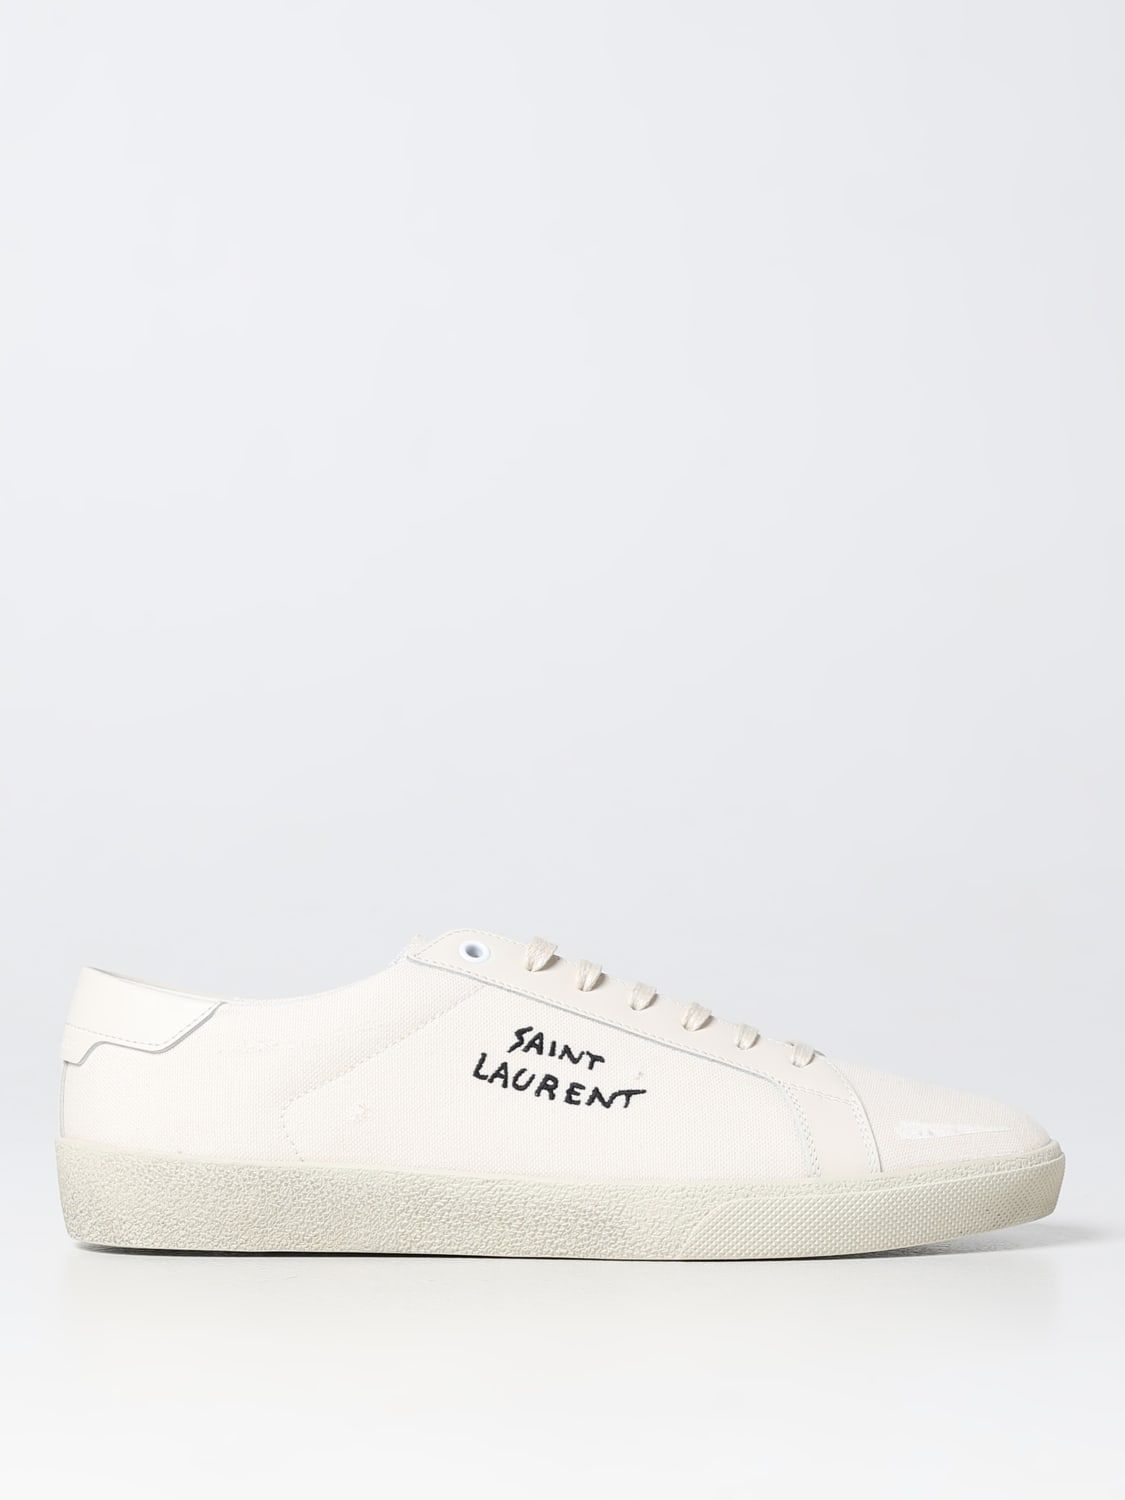 SAINT LAURENT: SL/06 sneakers in used canvas with embroidered logo - Yellow Cream | Saint Laurent... | Giglio.com - Global Italian fashion boutique